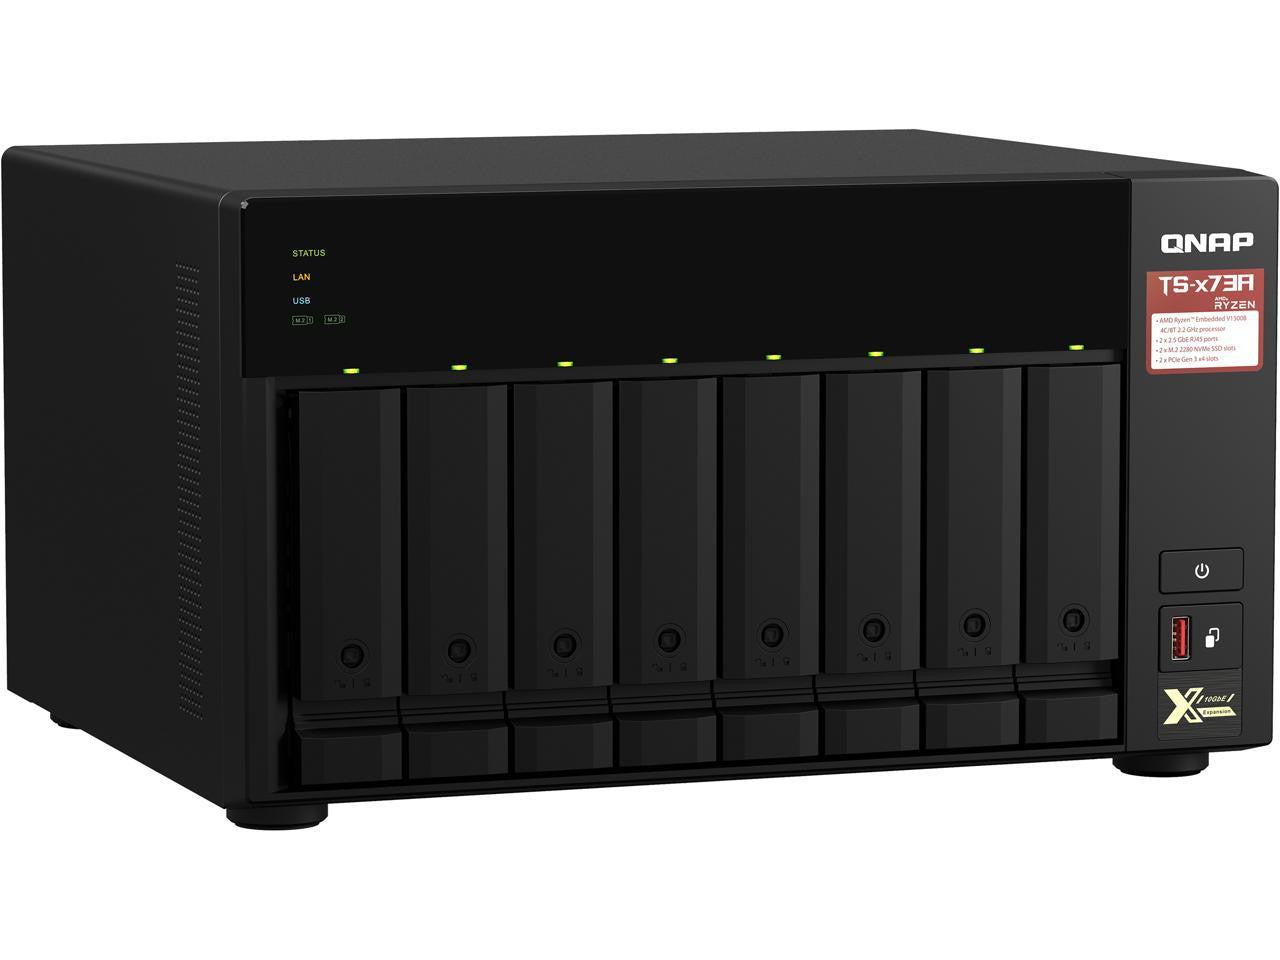 QNAP TS-873A 8-BAY NAS with 32GB DDR4 RAM and 80TB (8x10TB) Western Digital RED PLUS Drives Fully Assembled and Tested